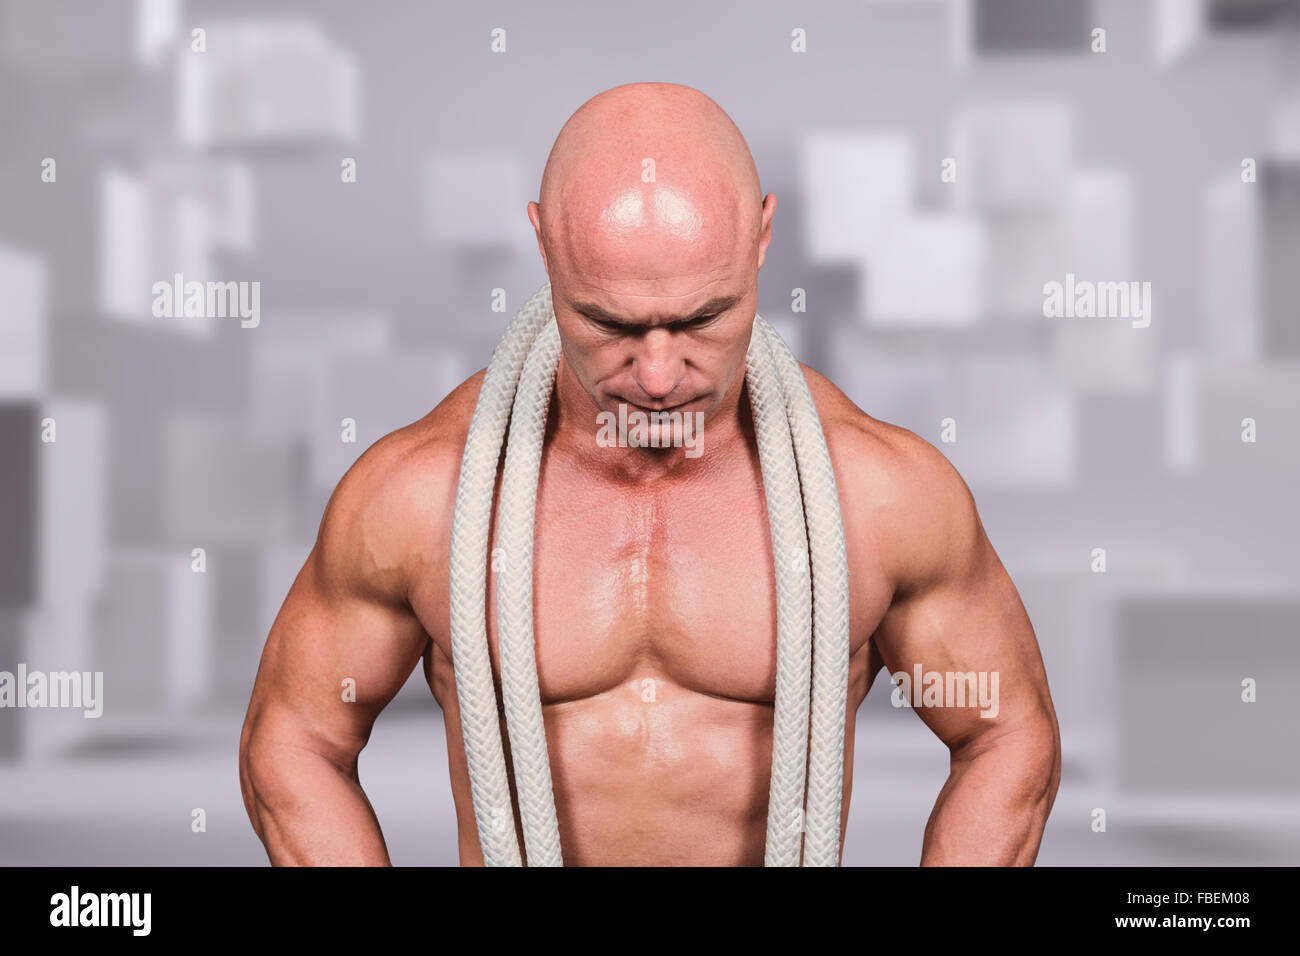 Composite image of bald man with rope around neck Stock Photo